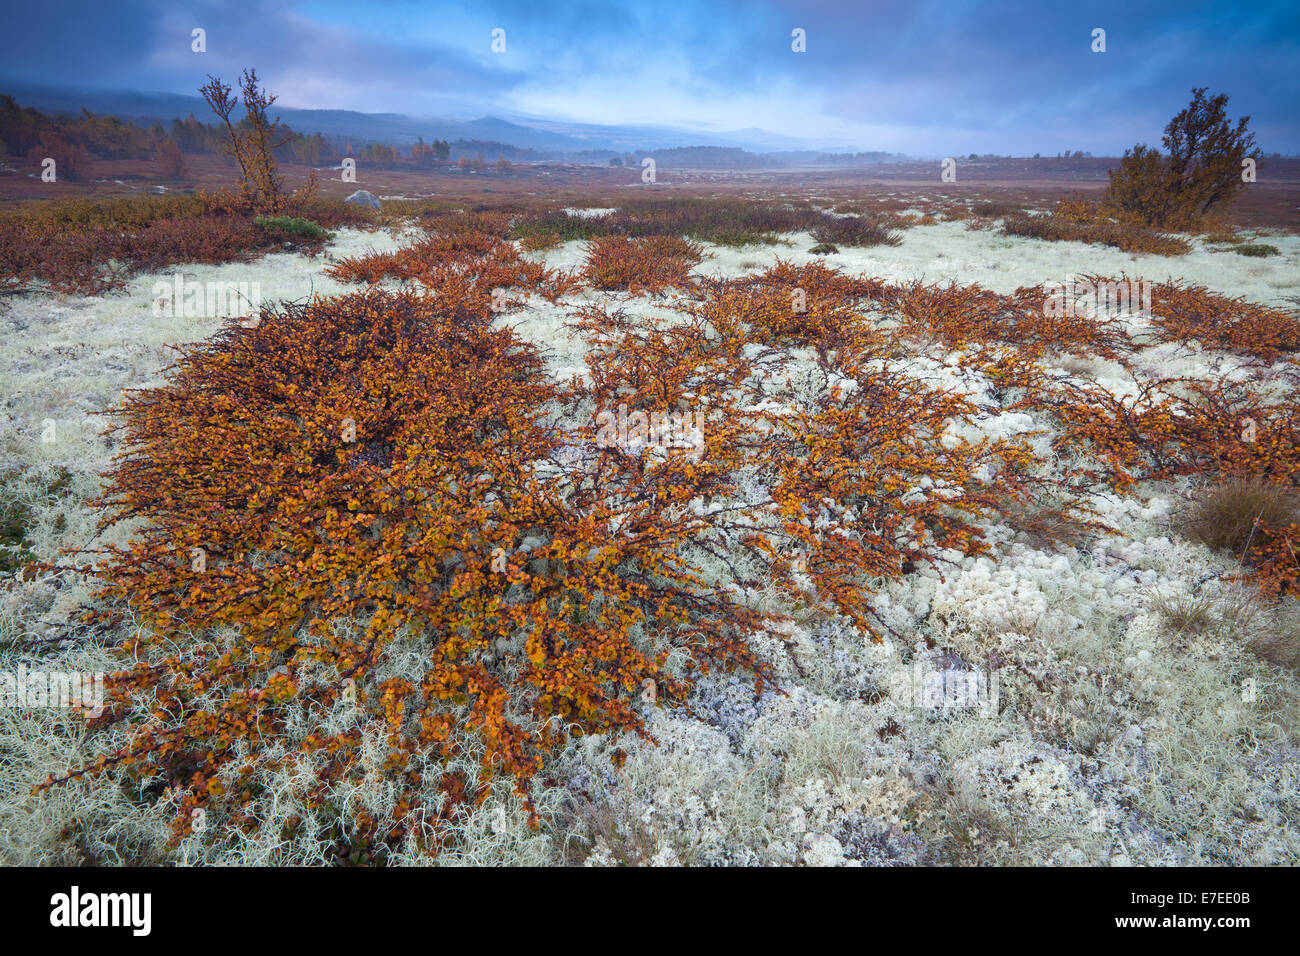 Fall colors at Fokstumyra nature reserve at Dovre in Oppland fylke, Norway. In the foreground is the small tree Dwarf Birch, Betula nana. Stock Photo